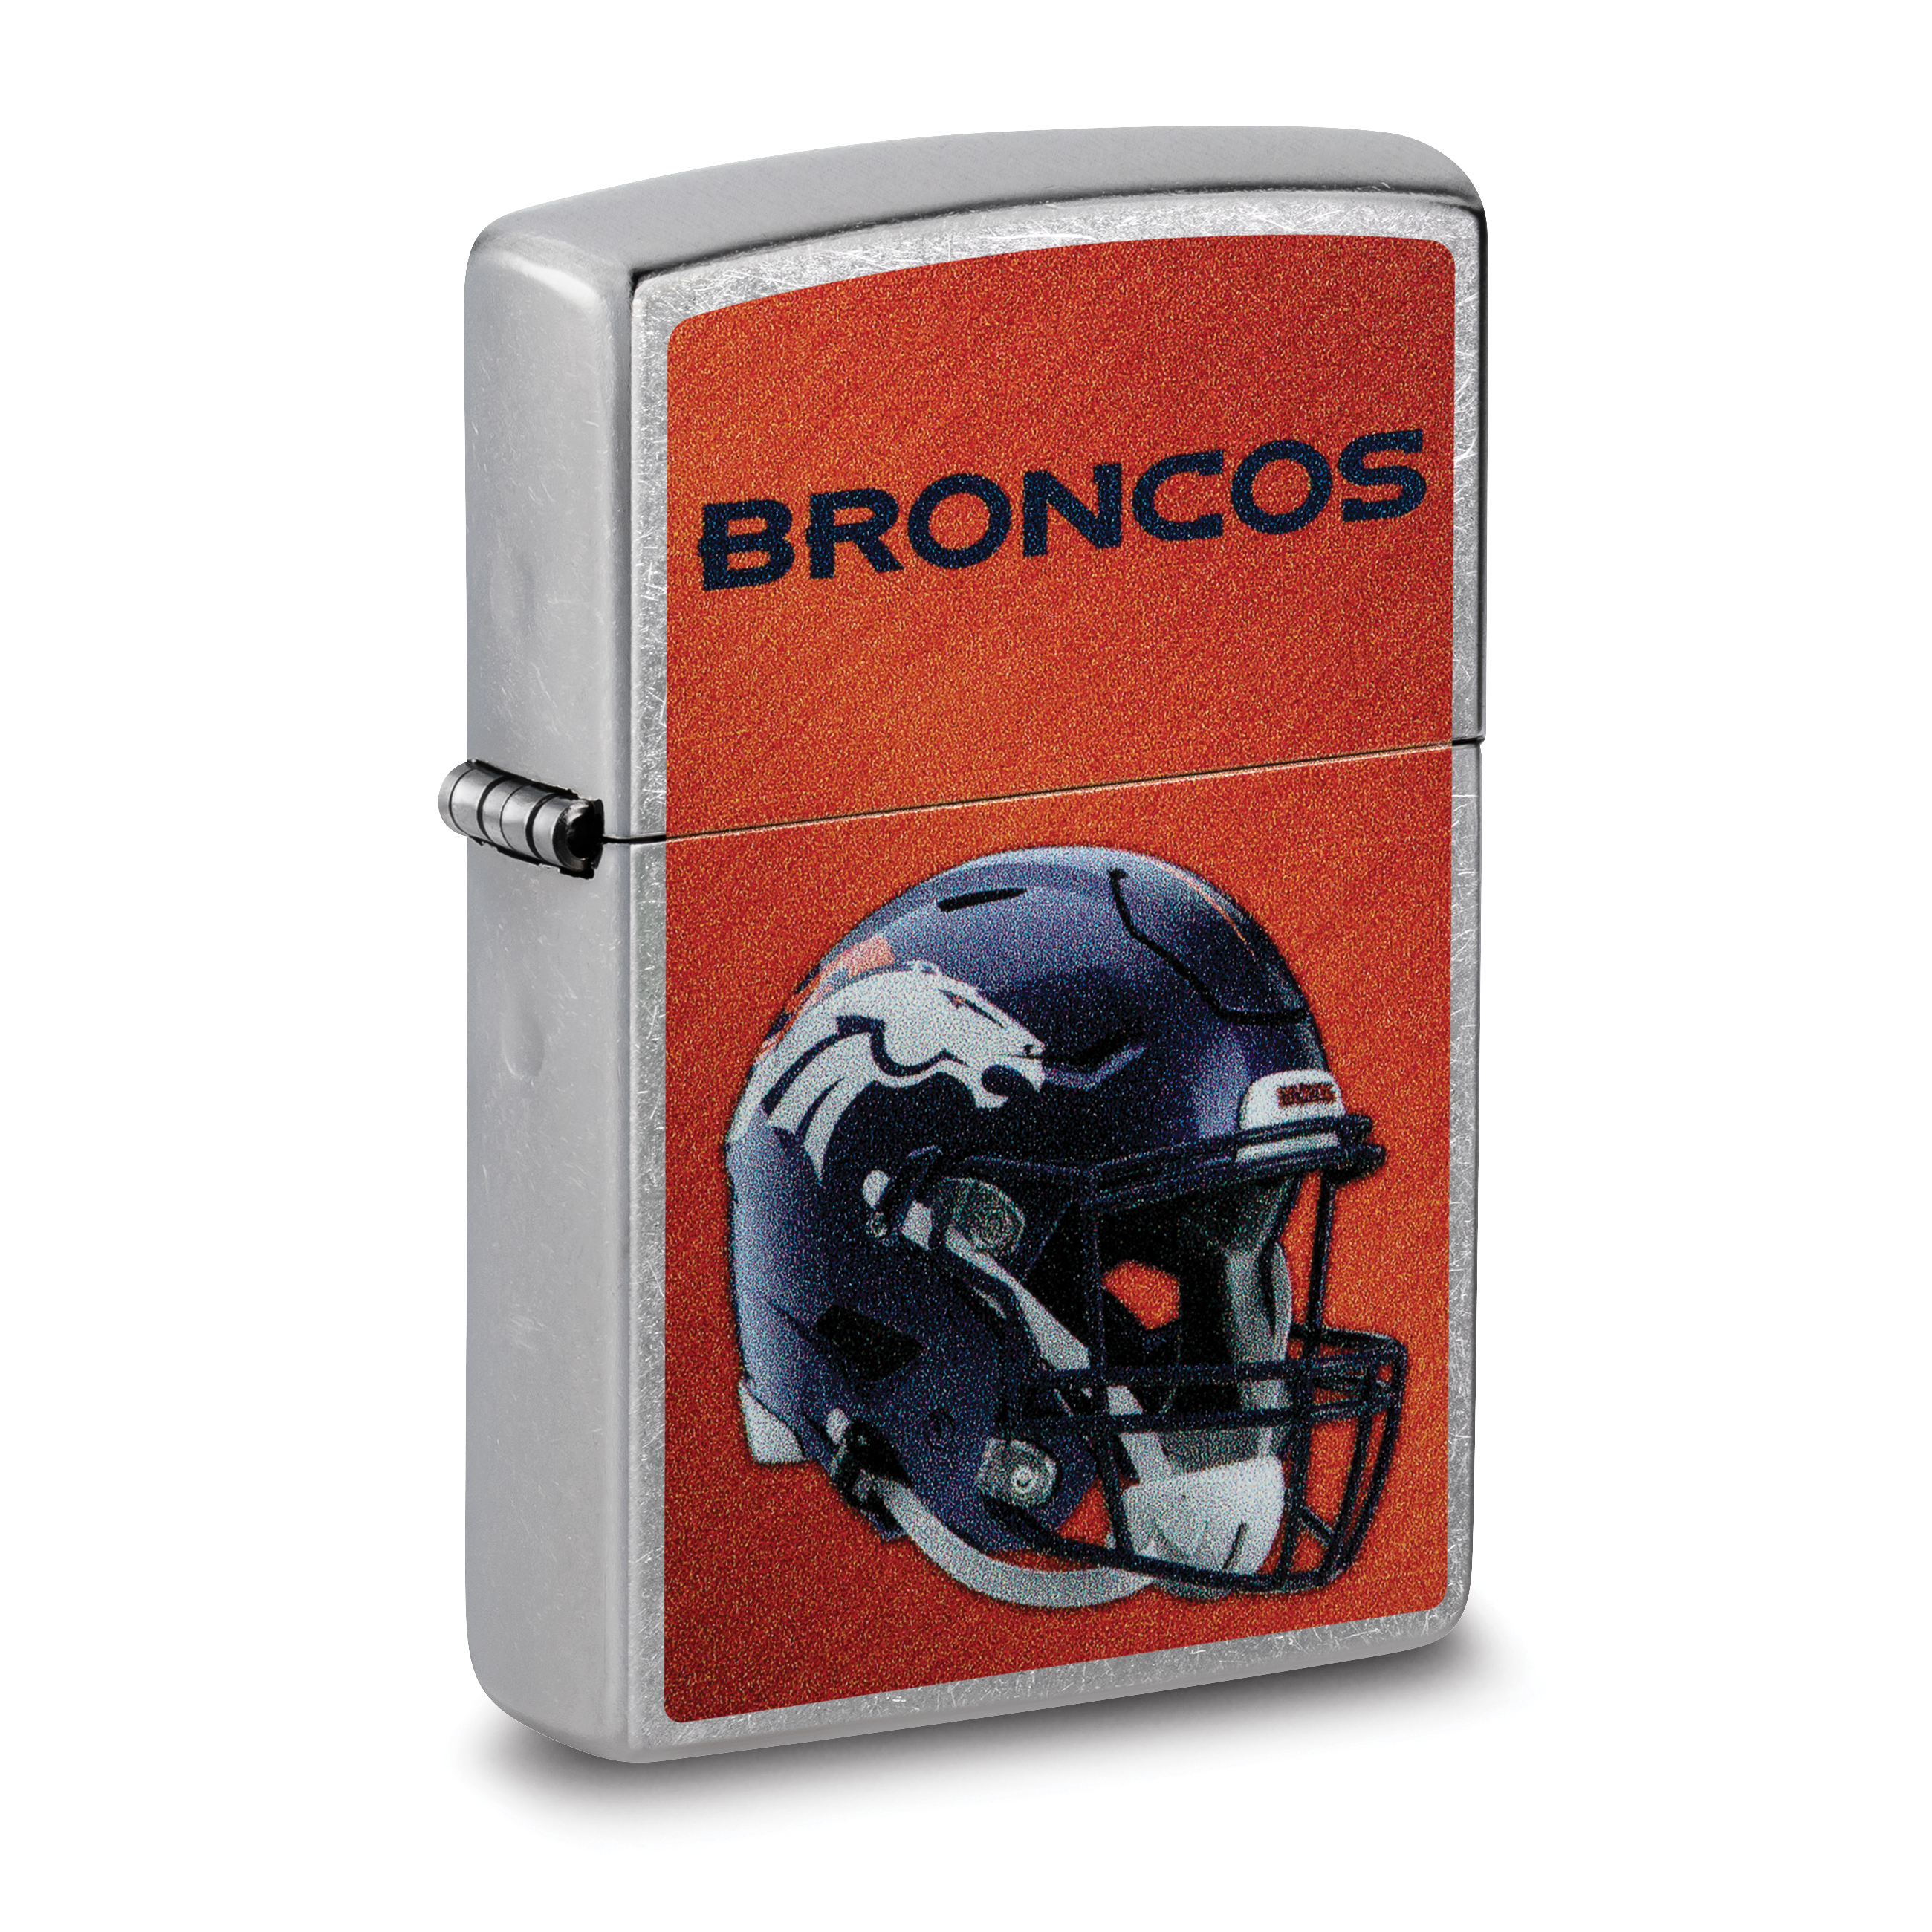 Denver Broncos Holiday Gift Guide, Holiday Essentials, Custom Gear,  Collectibles | Official Broncos Shop